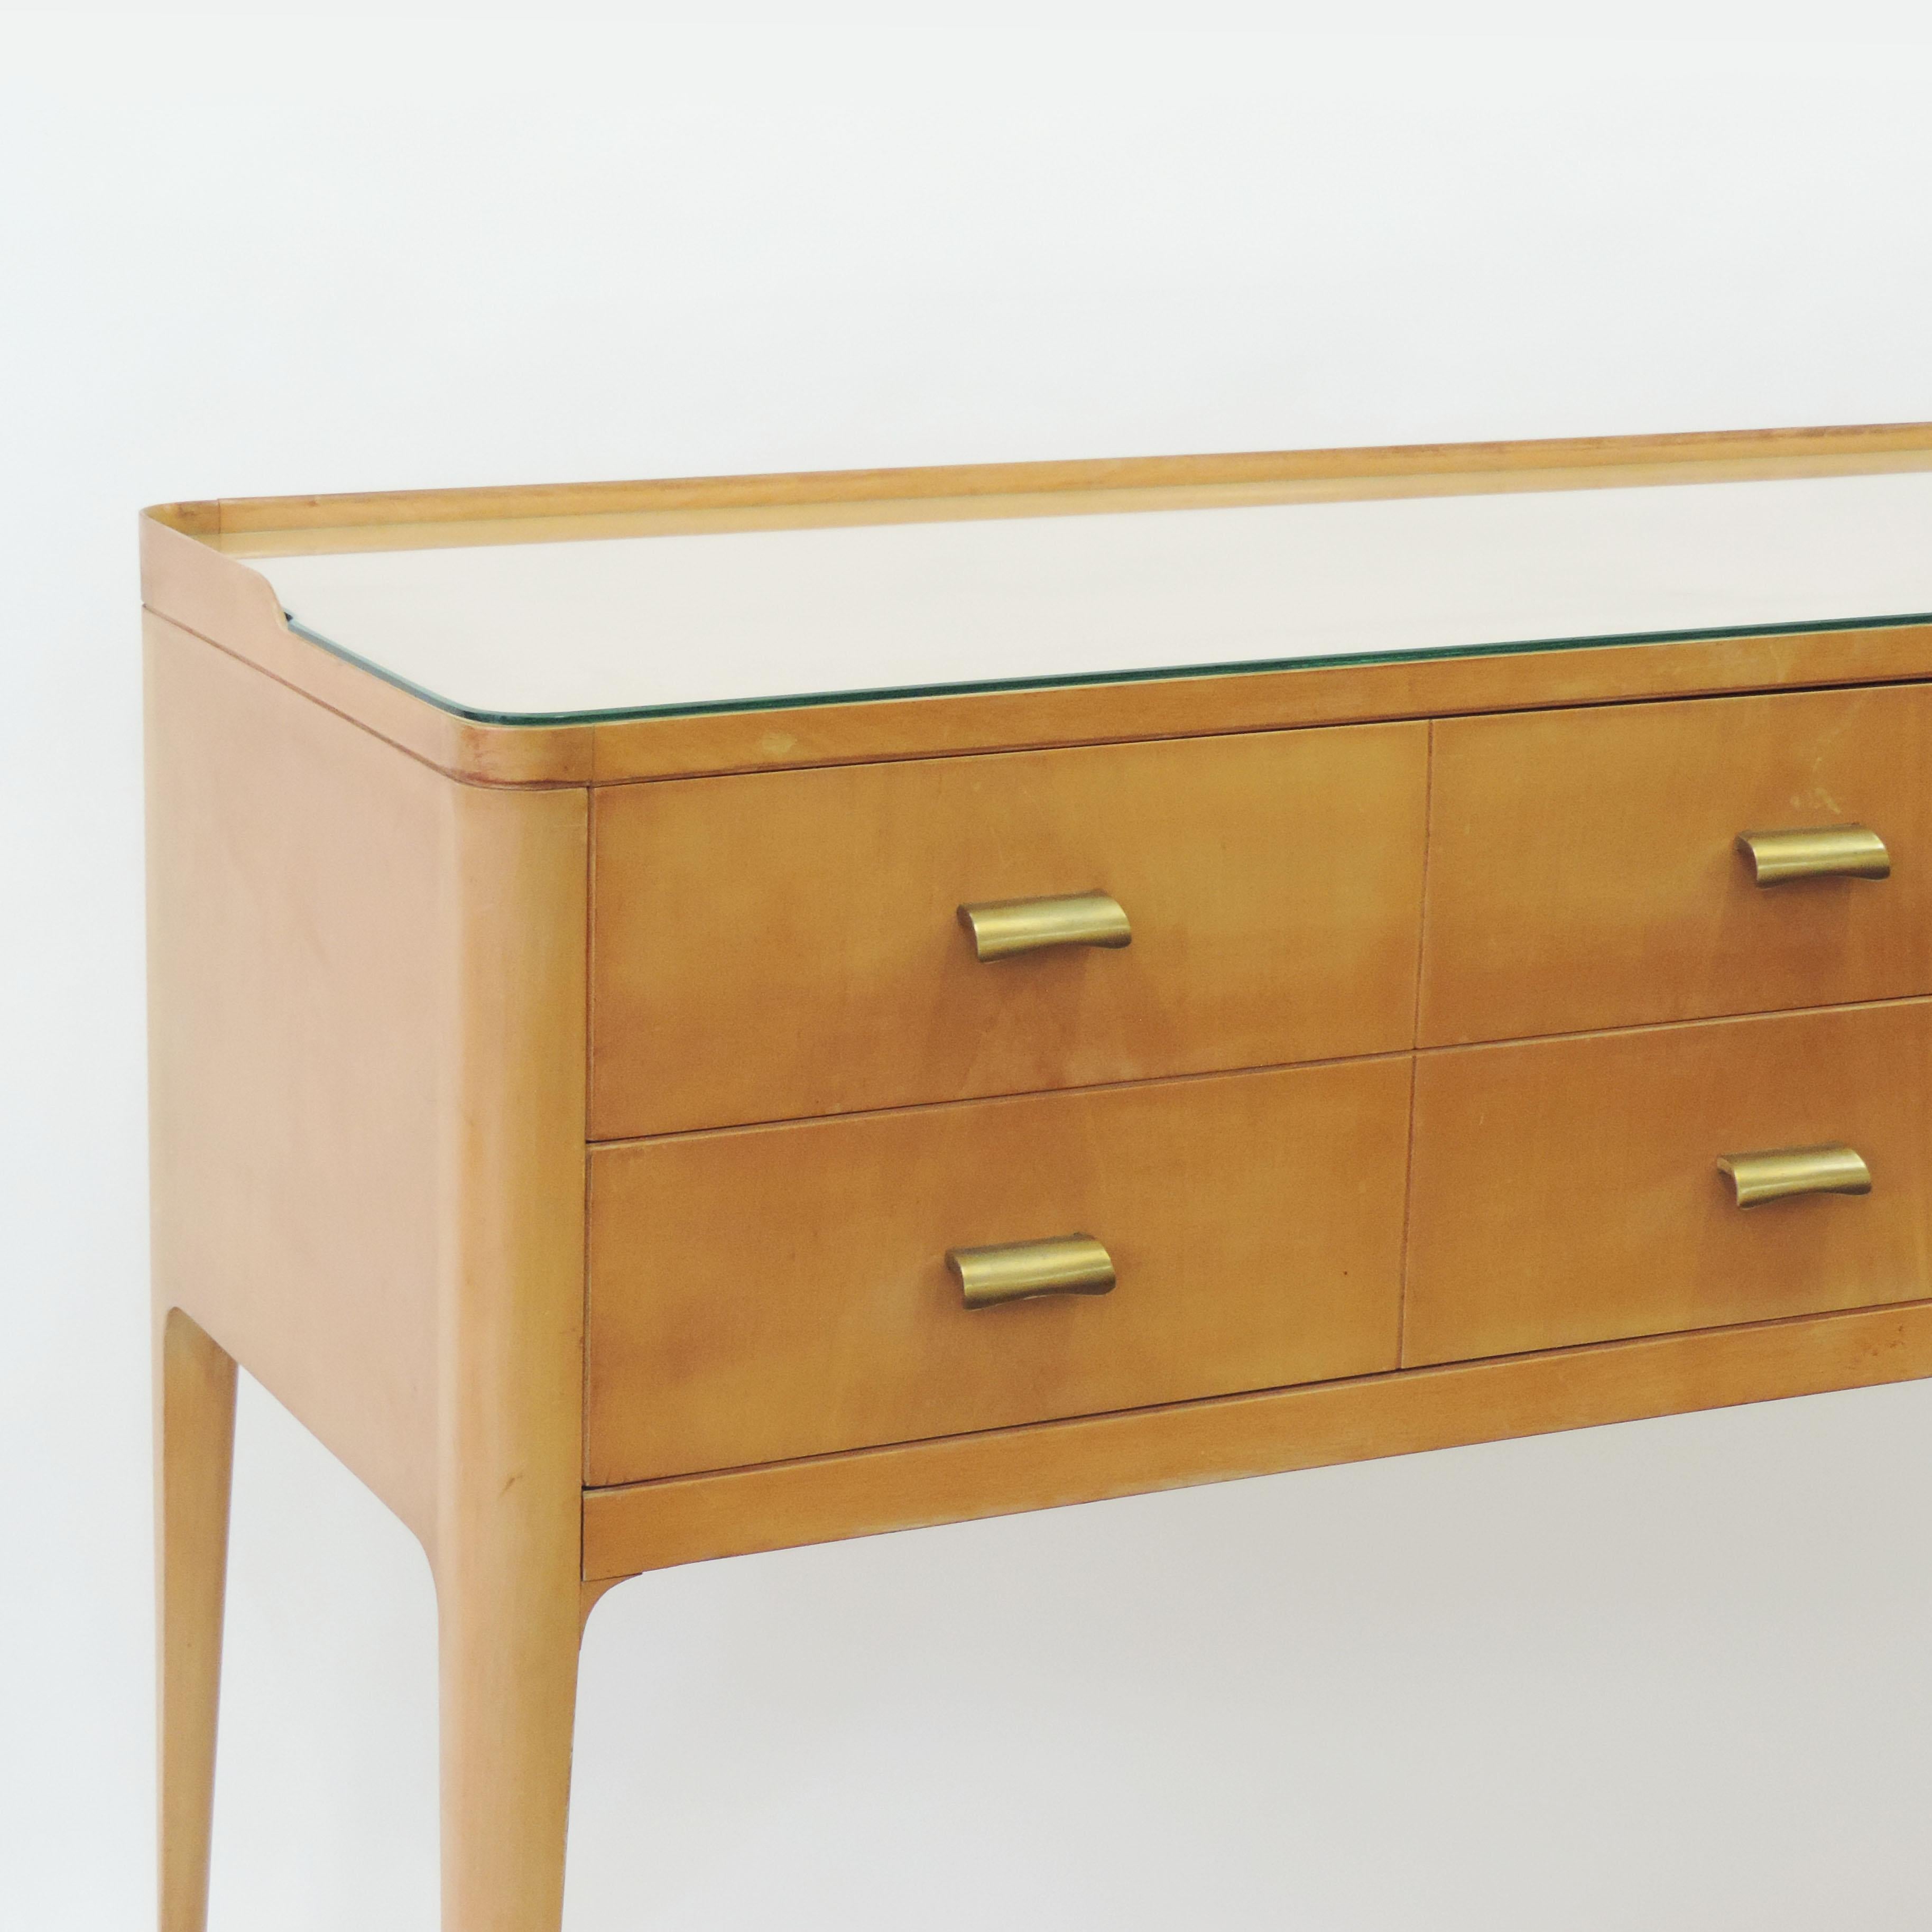 Italian 1950s Curved Wooden Sideboard with Brass Handles 2